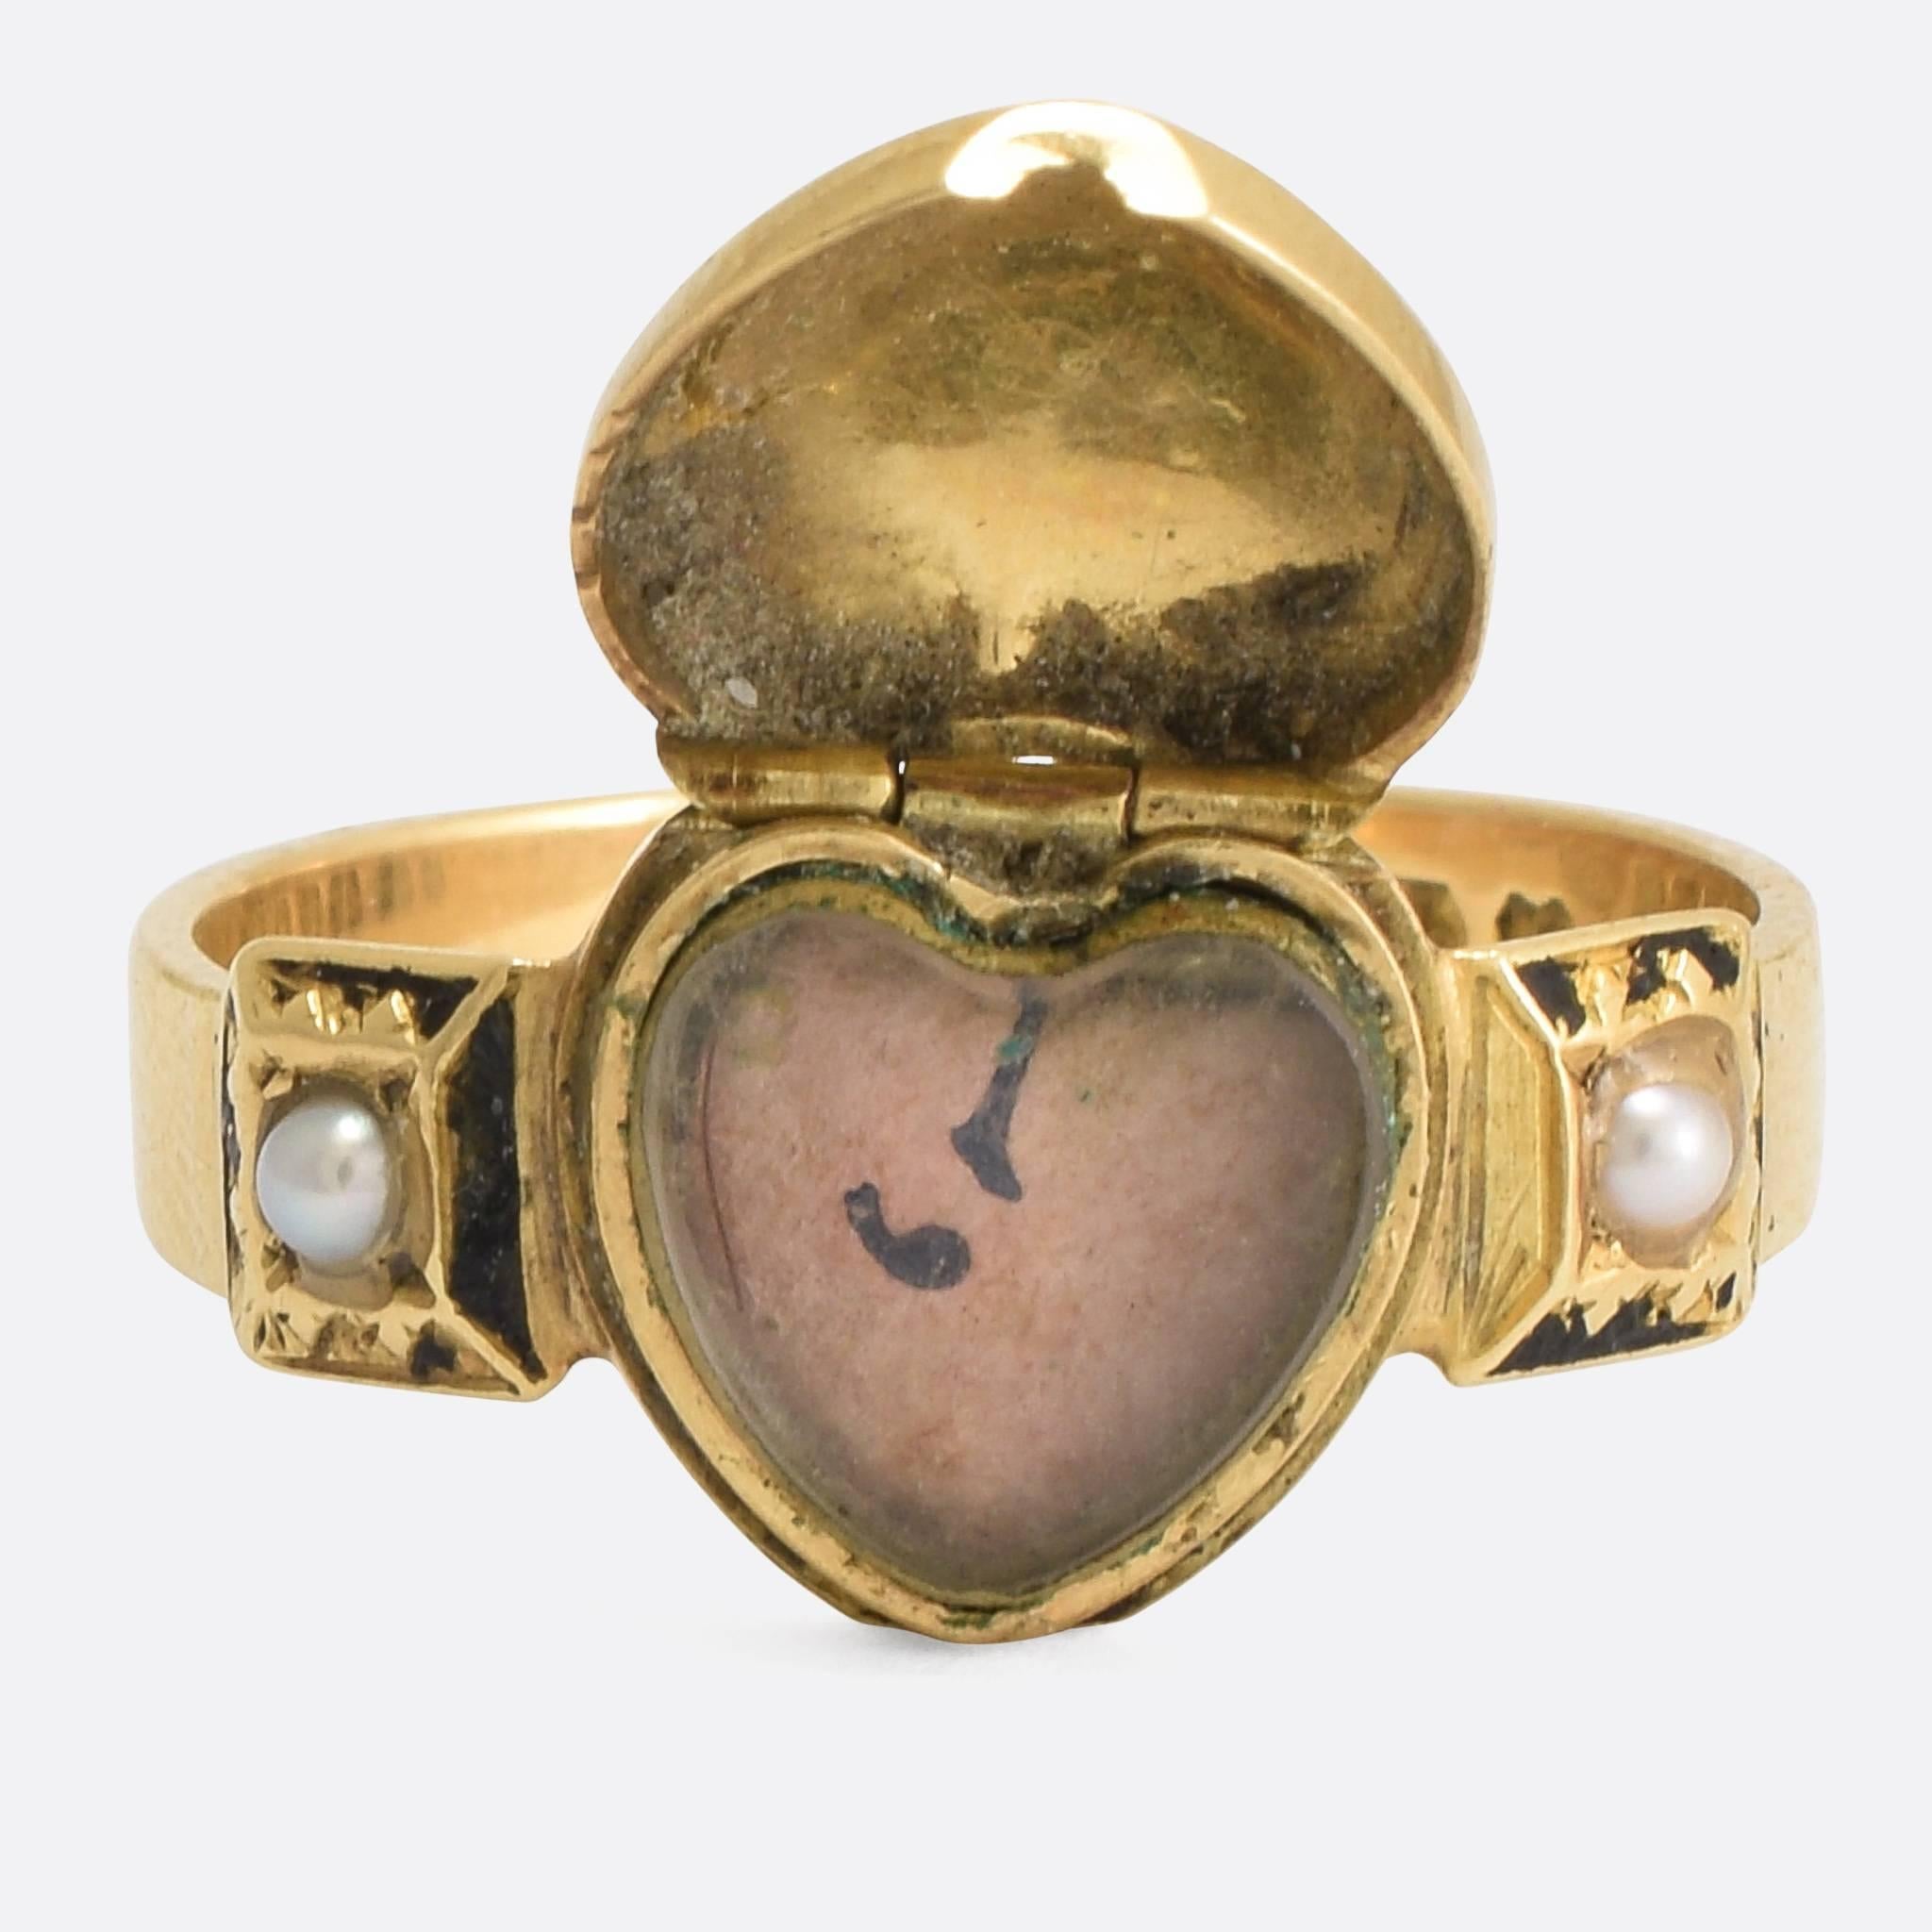 A cool Victorian mourning ring, the head modelled as a heart with hinged top allowing the front to open up revealing a glass locket compartment. The front of the heart features a Forget-Me-Not flower, set with diamonds, and the remnants of the black